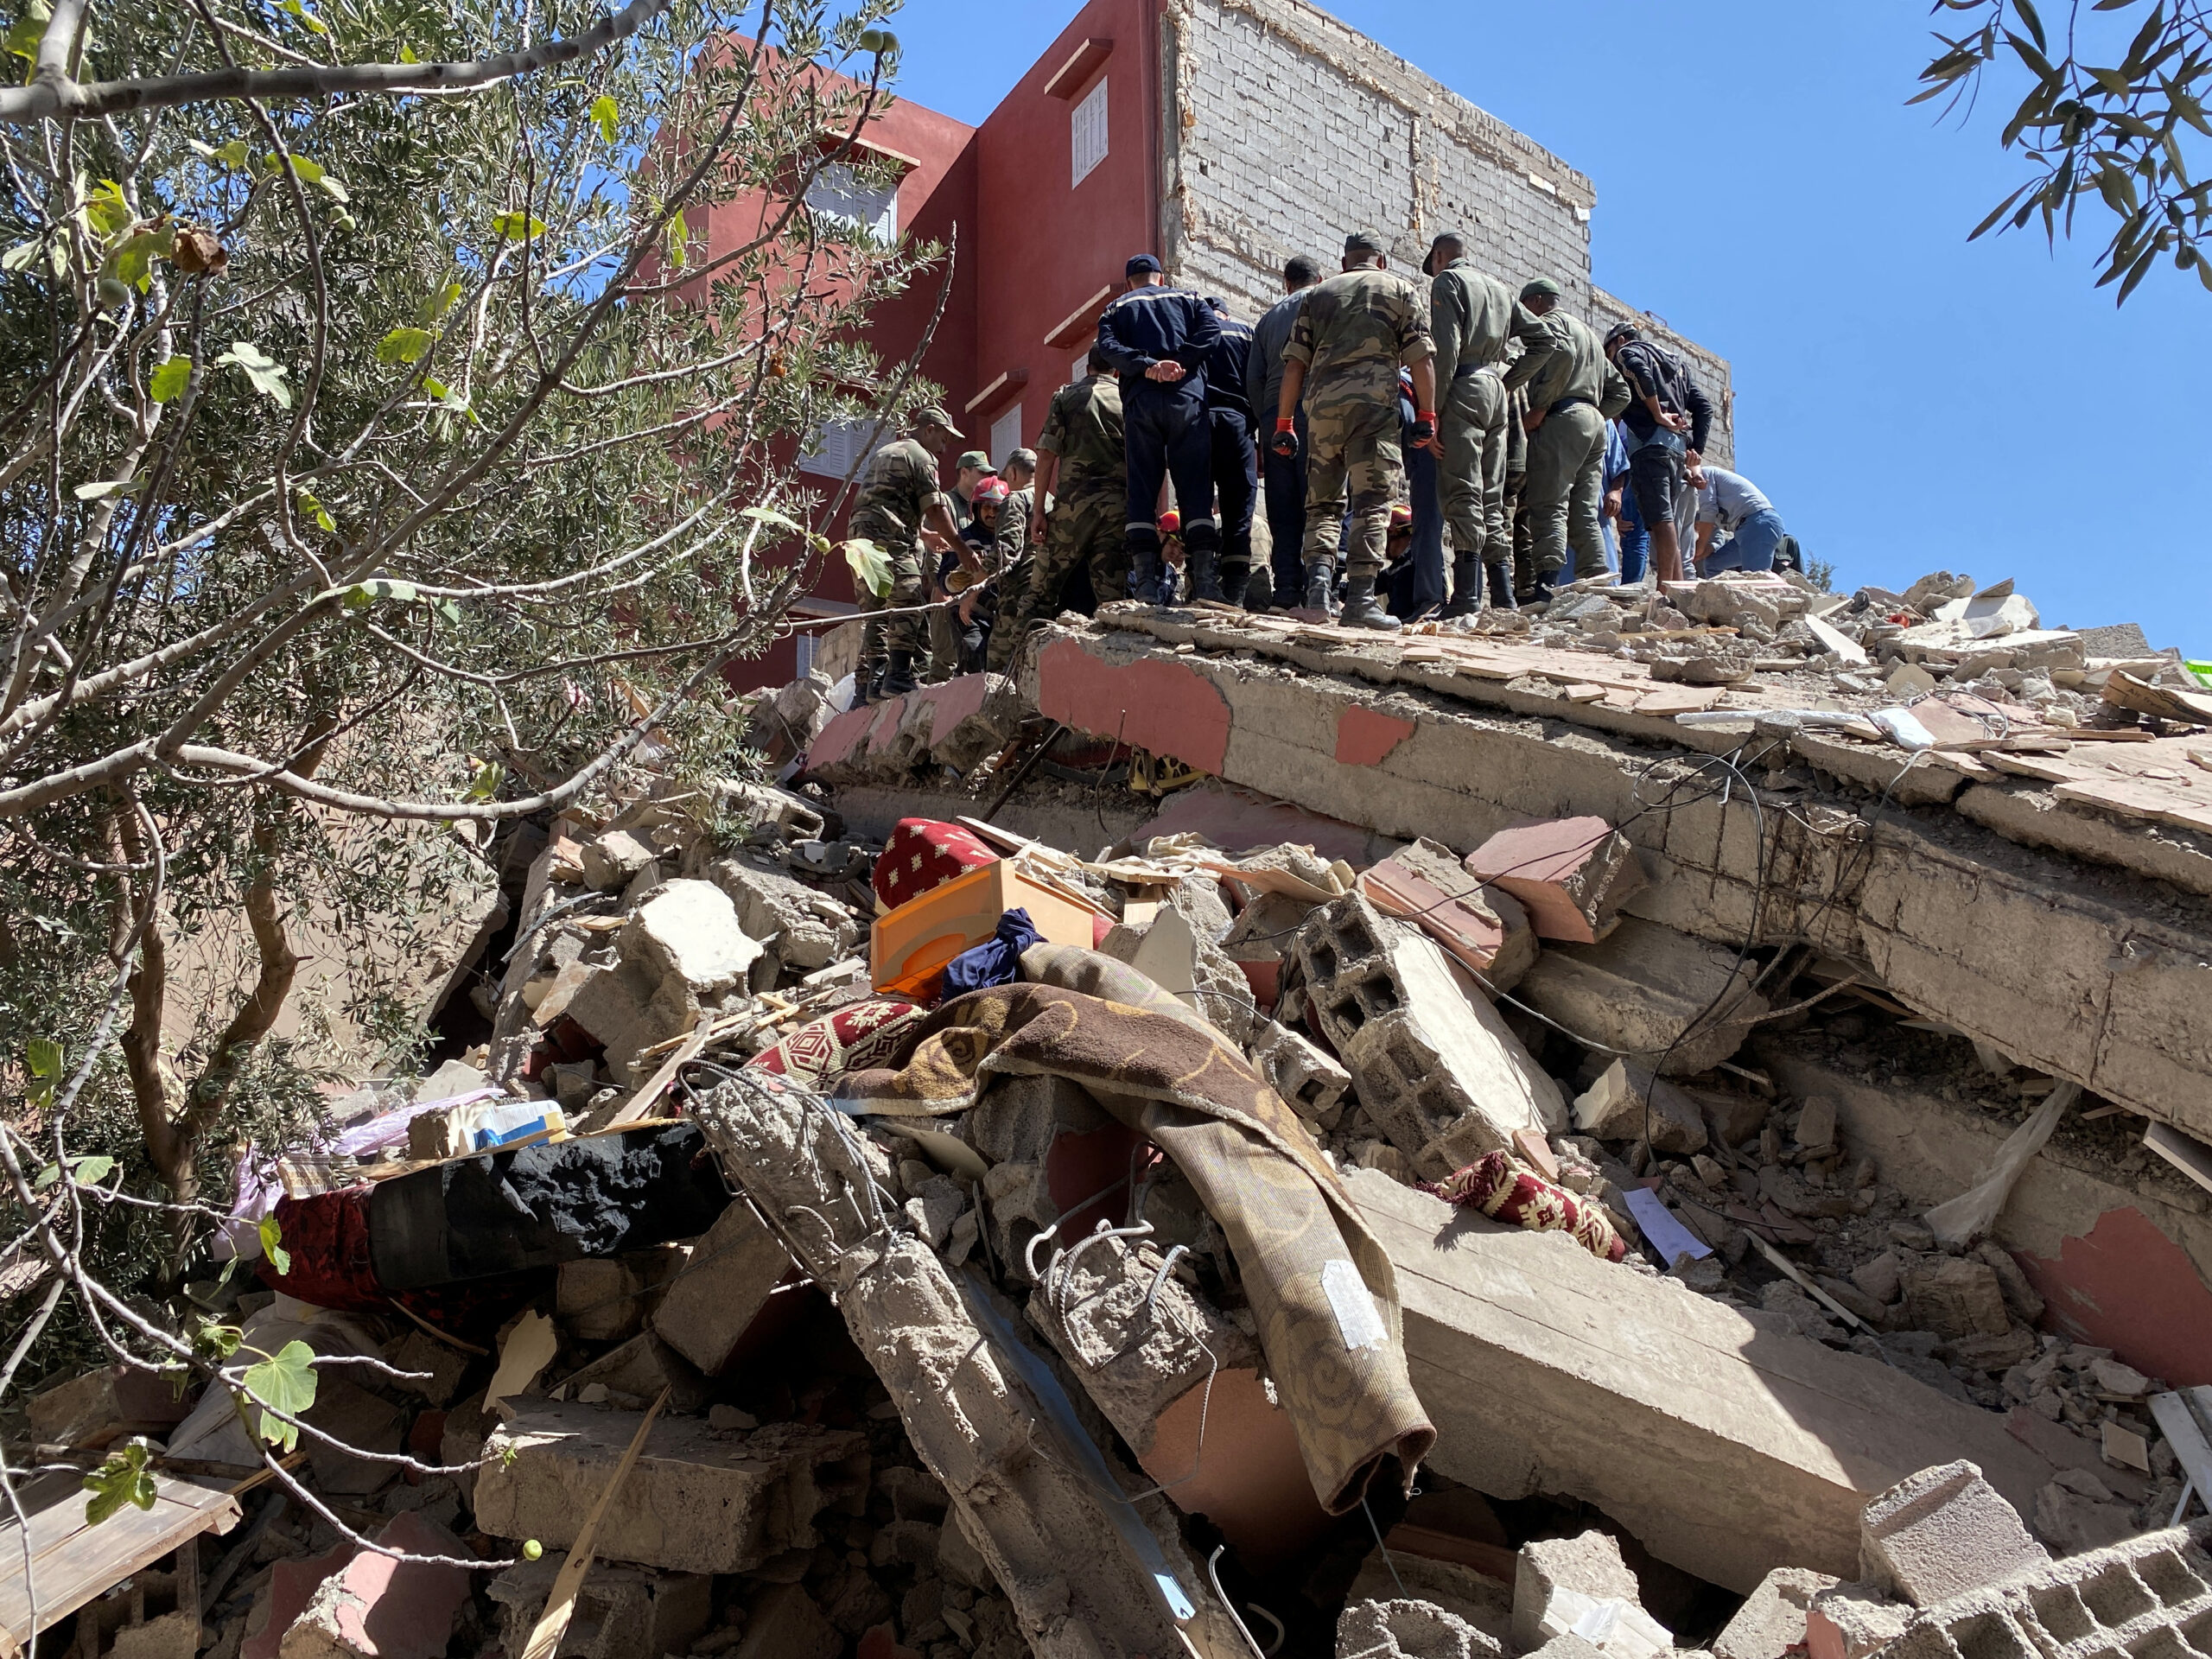 Morocco earthquake kills over 800 people, rescuers dig for survivors